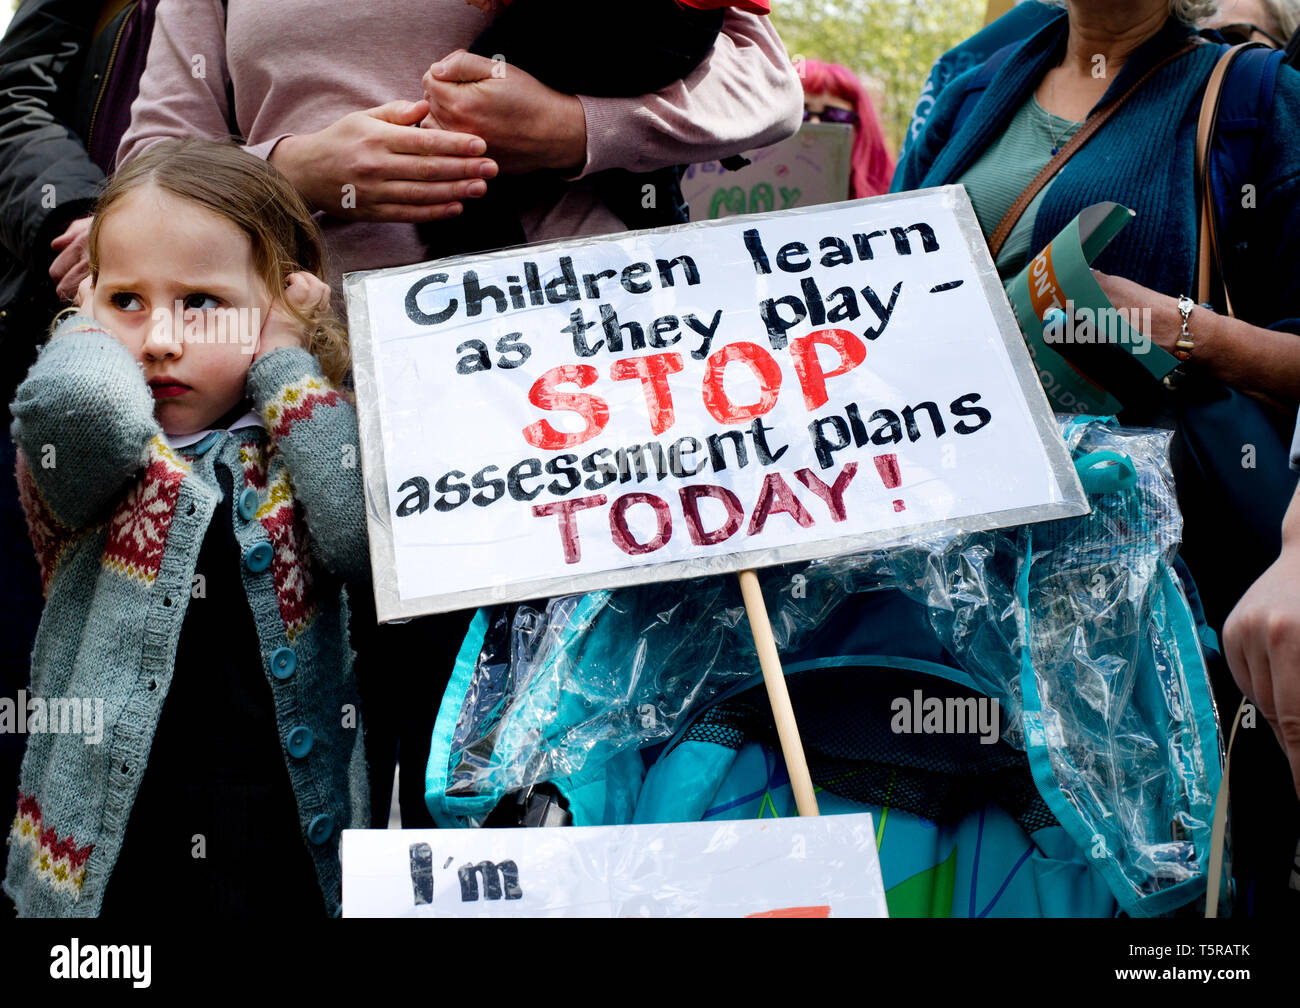 Westminster April 25th 2019. 'March of the four year olds', a protest against testing. Stock Photo